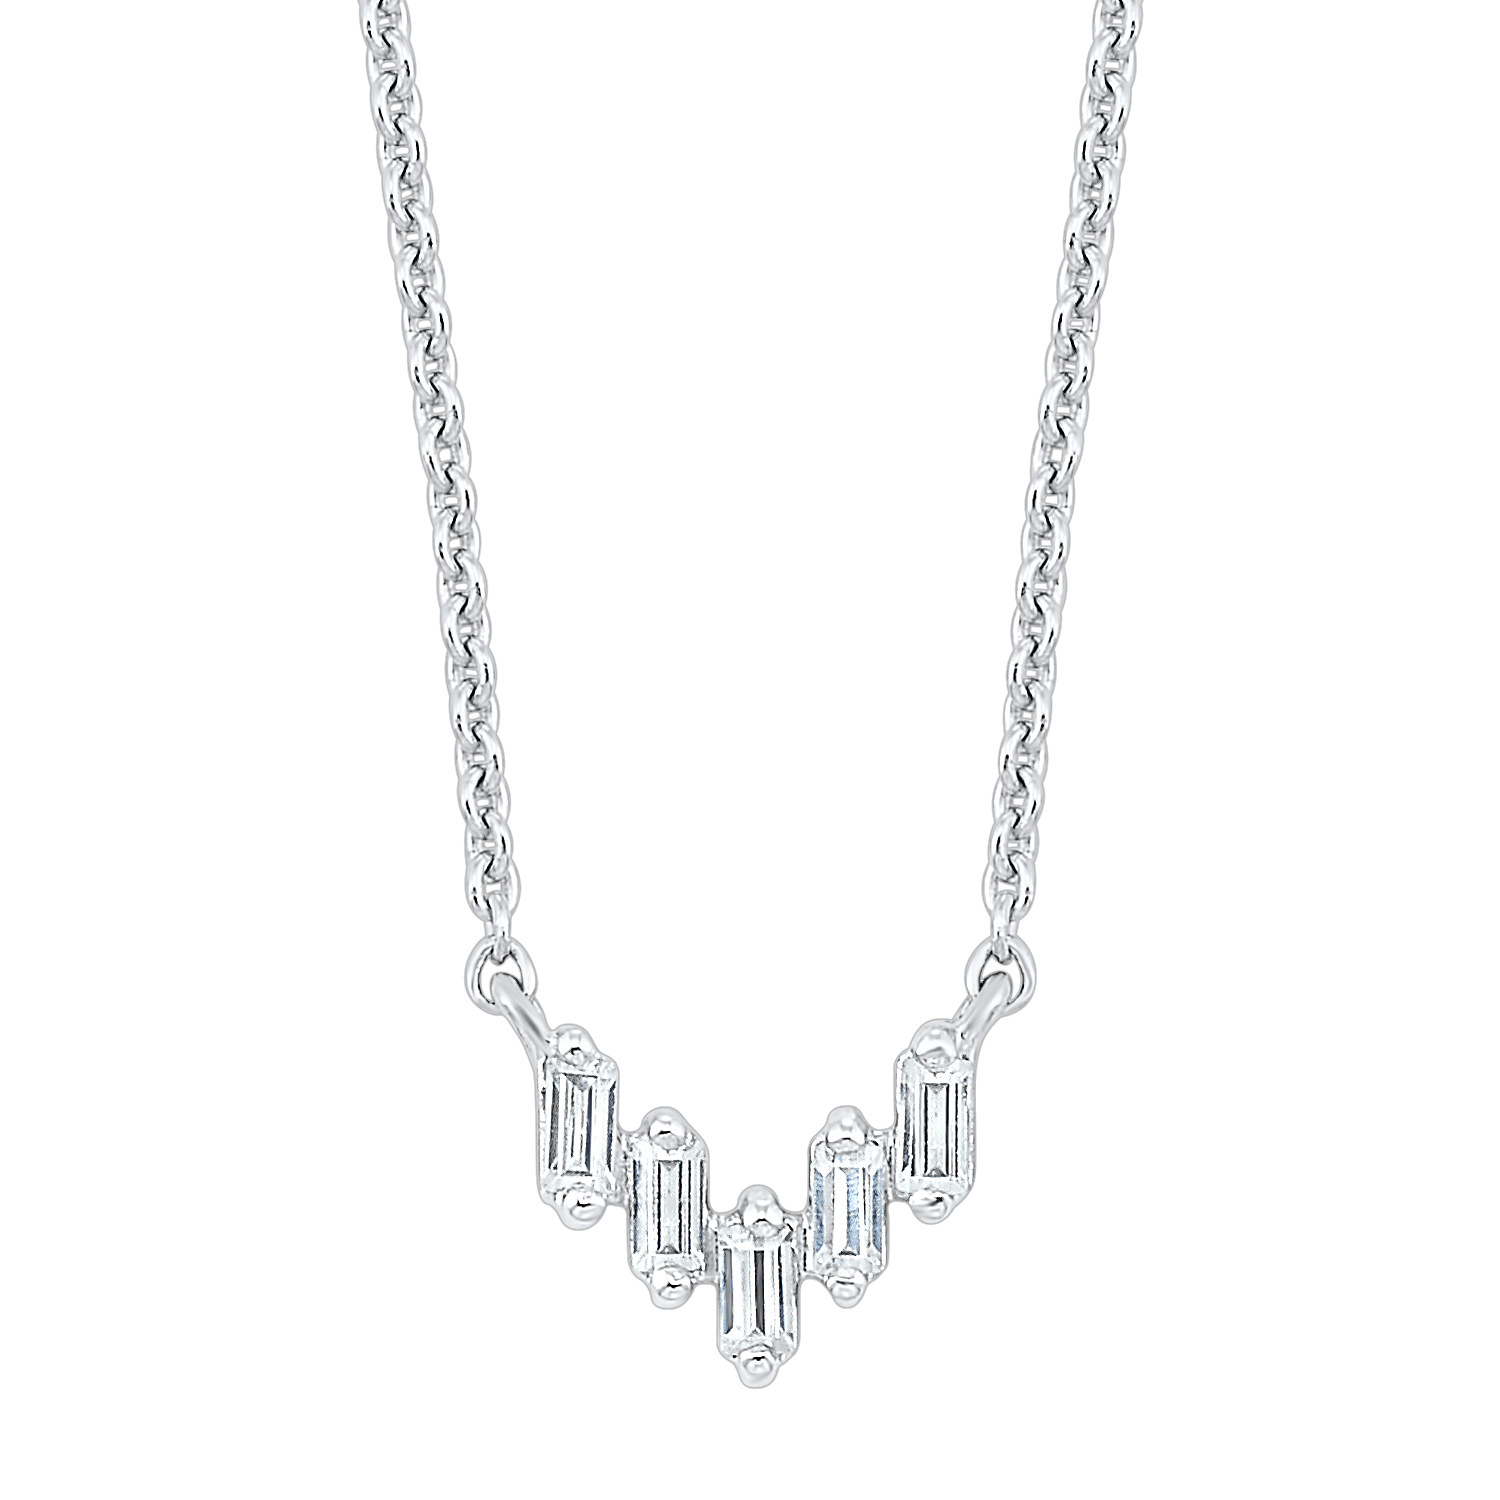 BW James Jewelers Necklace 16 Page Christmas Catalog Offer 14K Diamond Necklace 1/10 ctw